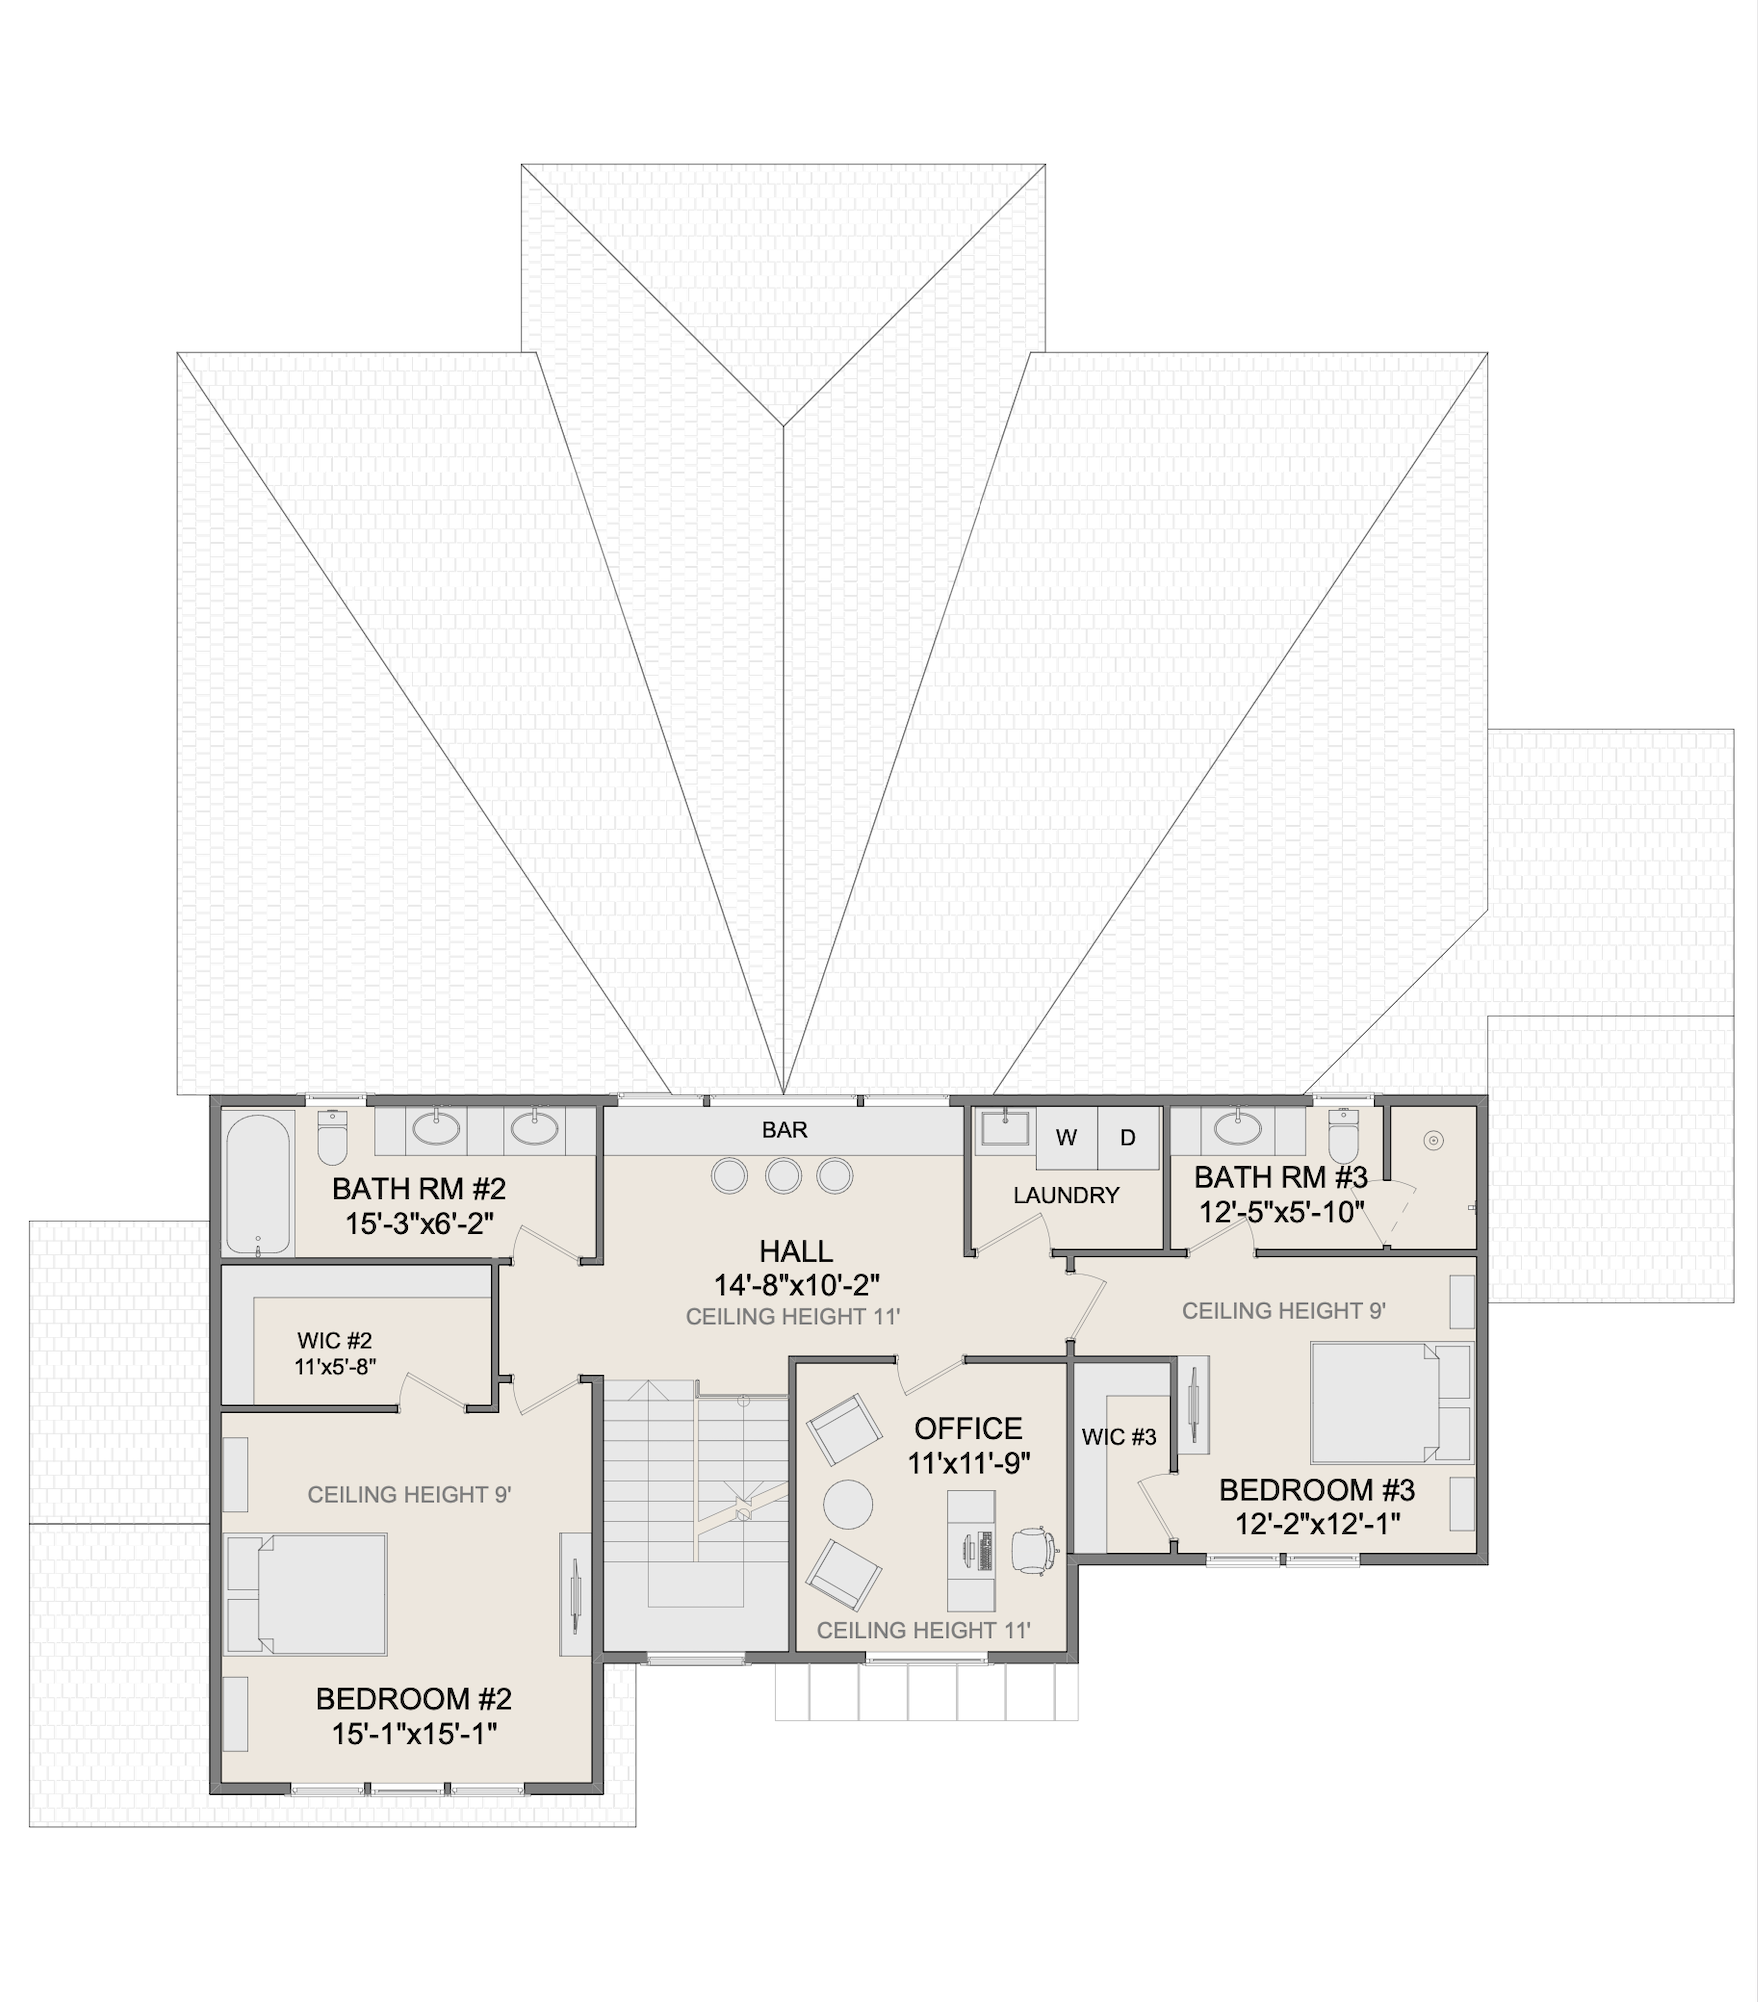 THE SILVER BIRCH HOUSE. Floor Plans for Family Houses, New House Plans